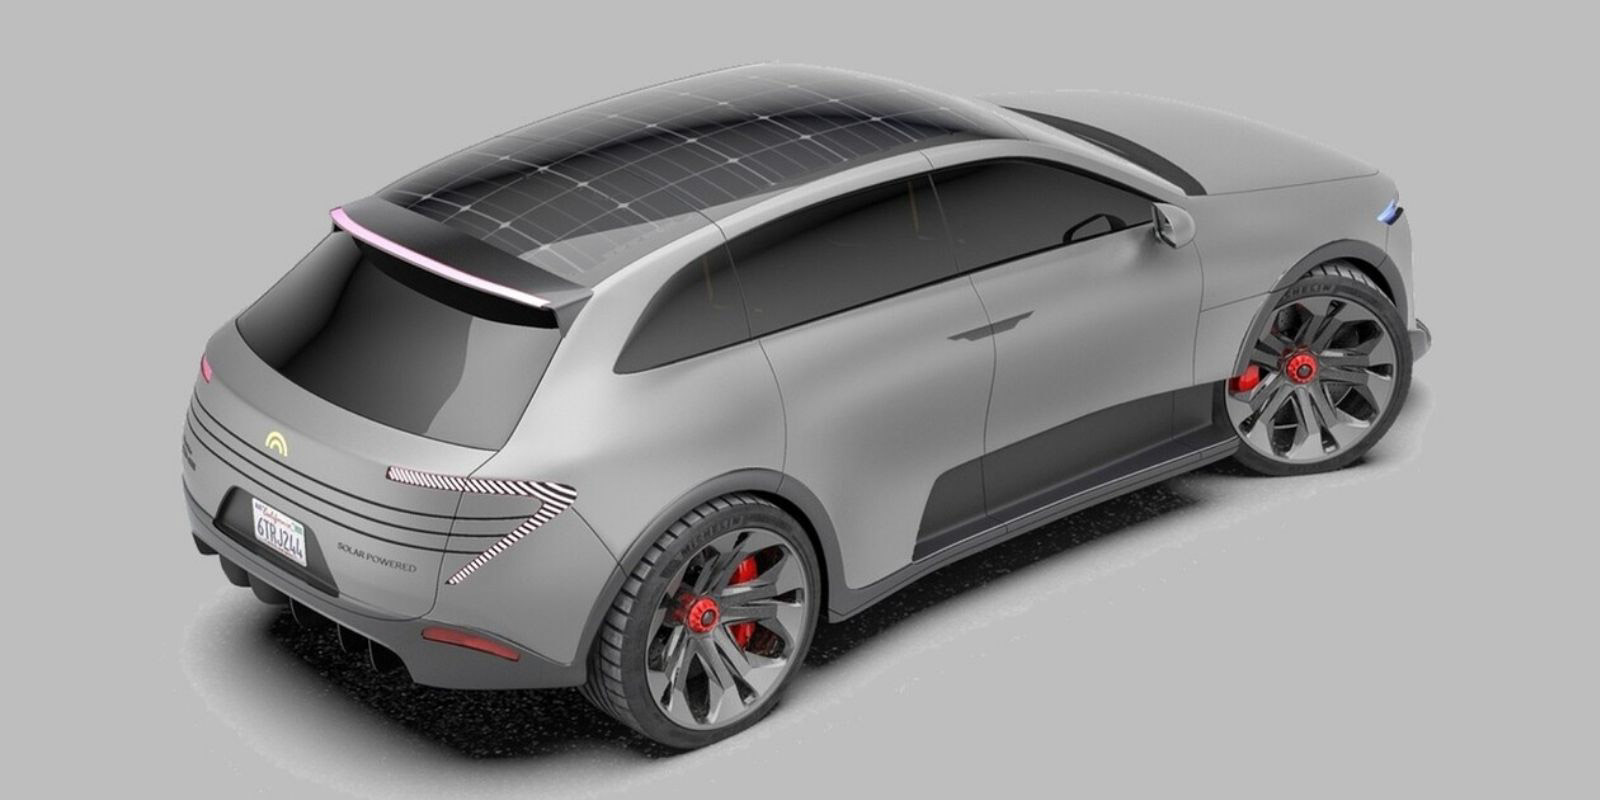 World's First Solar Powered 'Humble One' Electric SUV - Top 5 Things